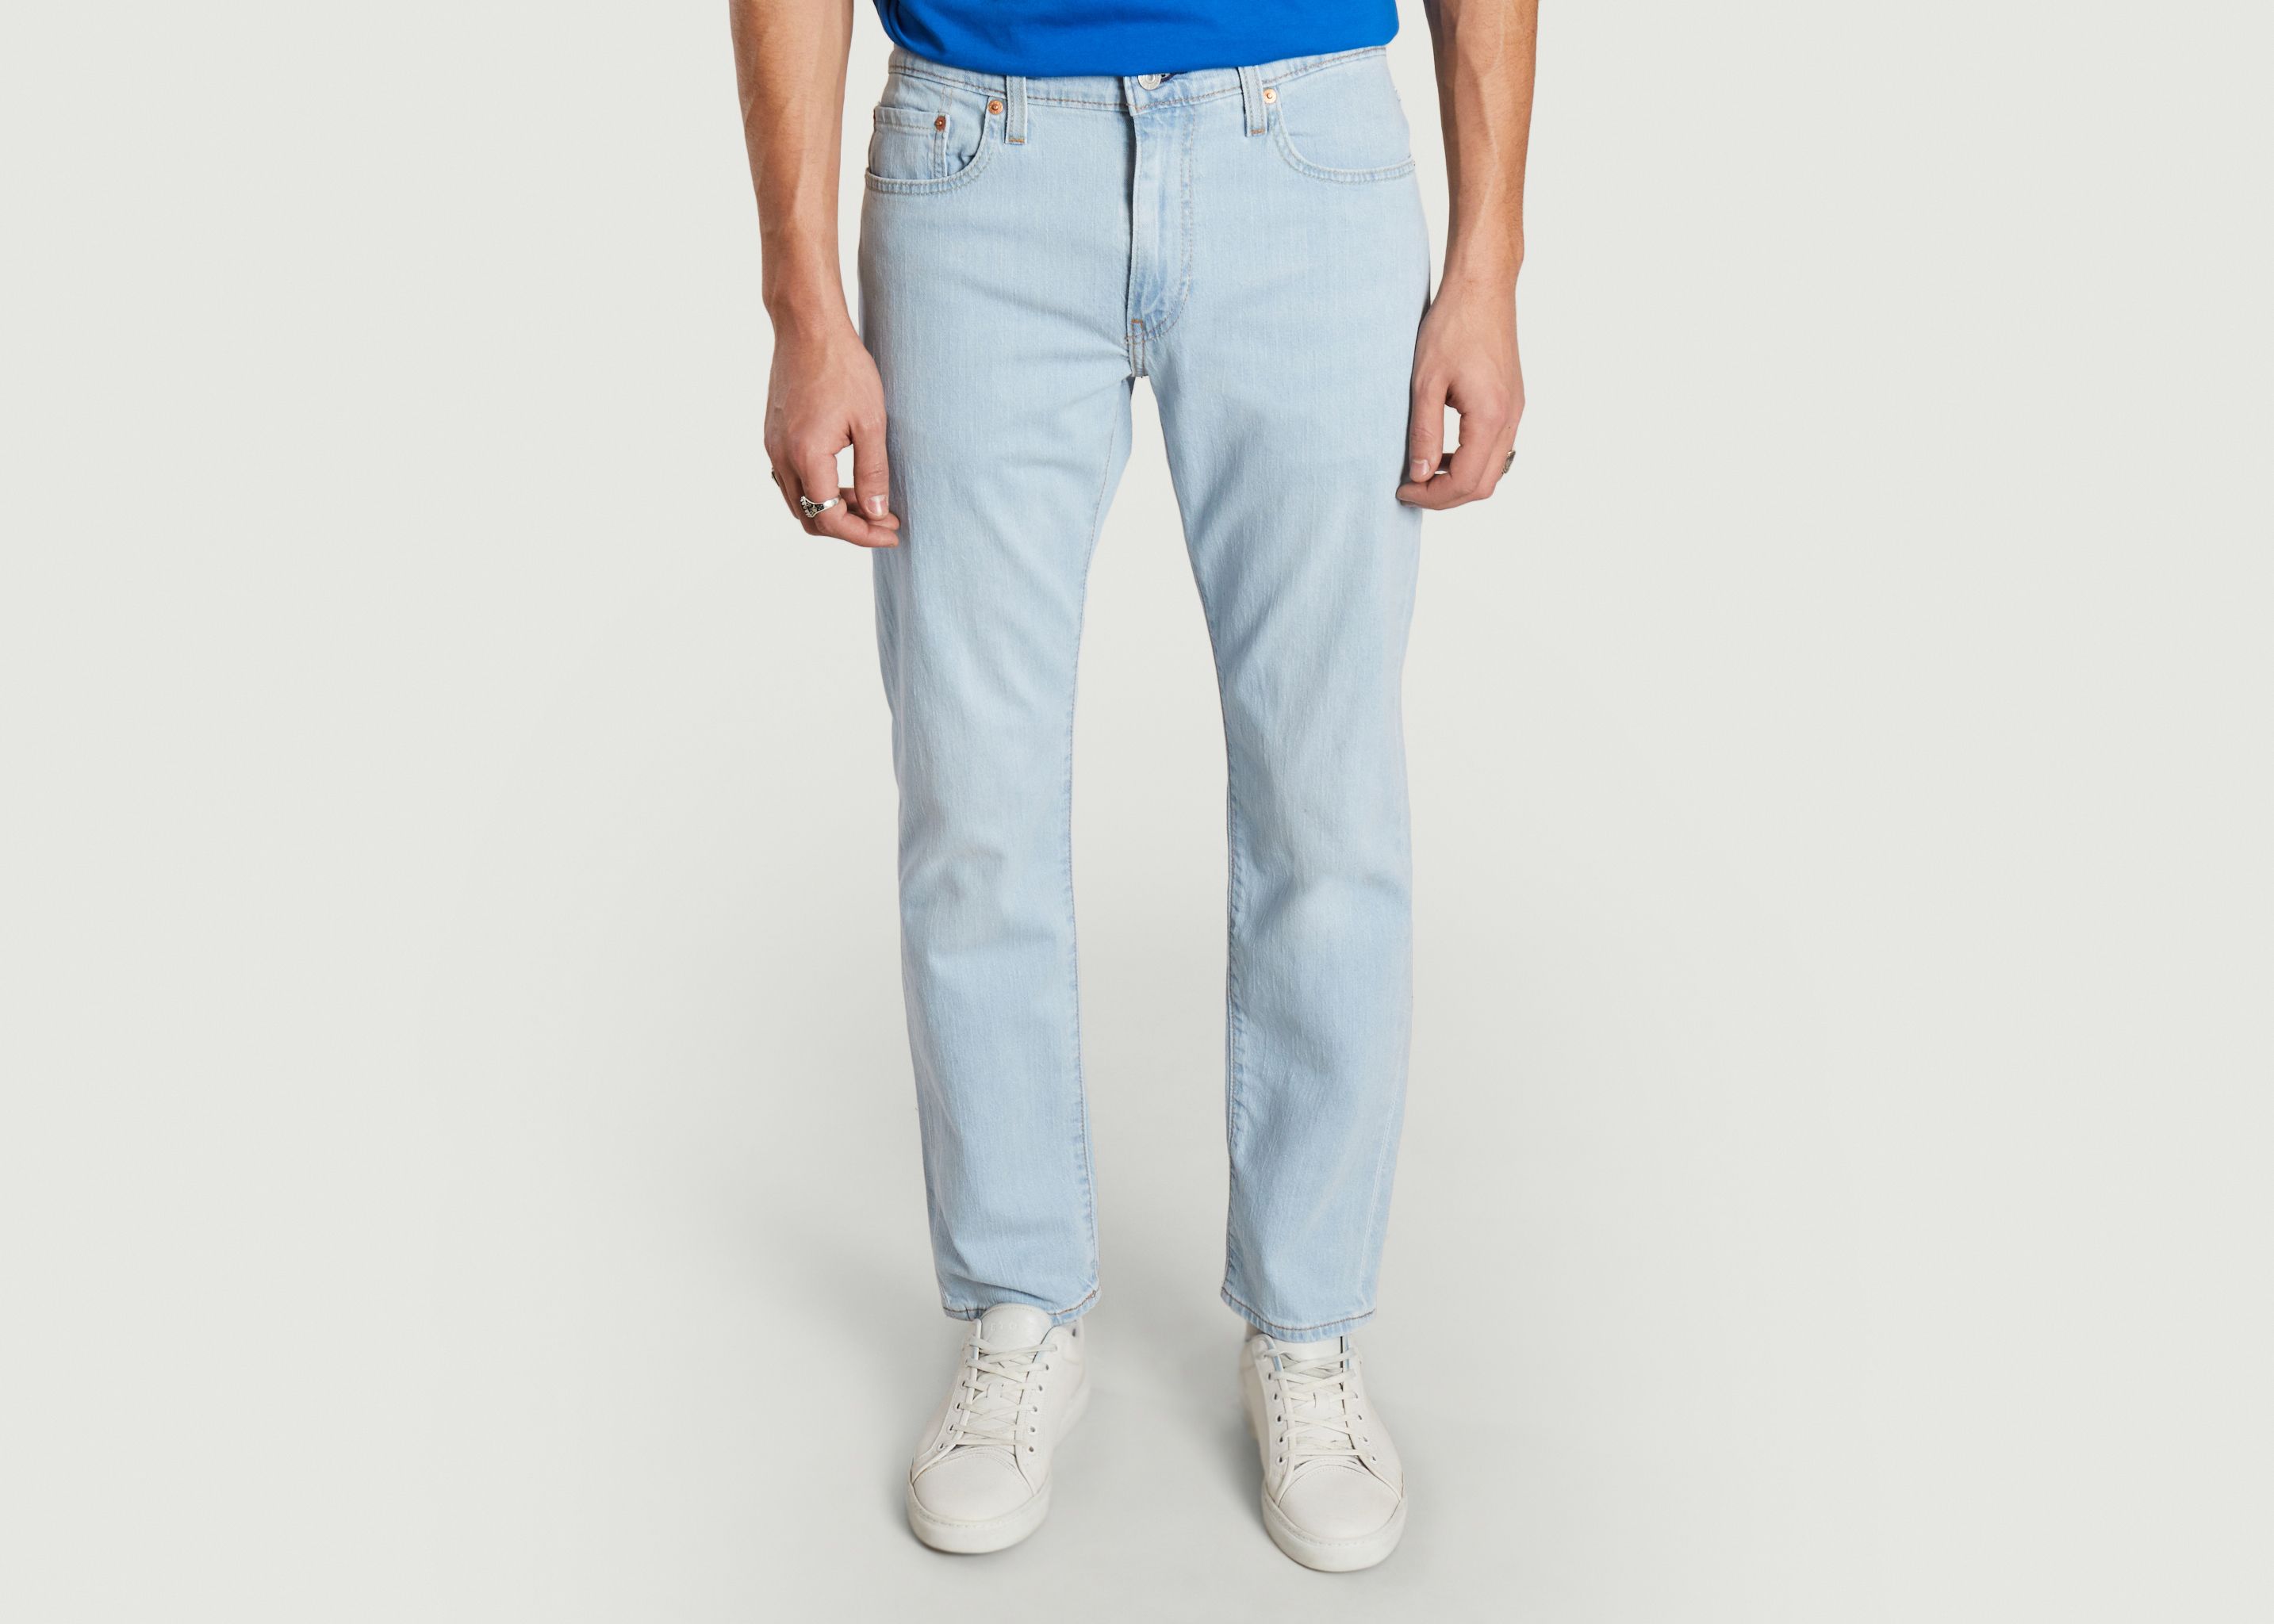 Jeans Levi's 502™ Spindel - Levi's Red Tab